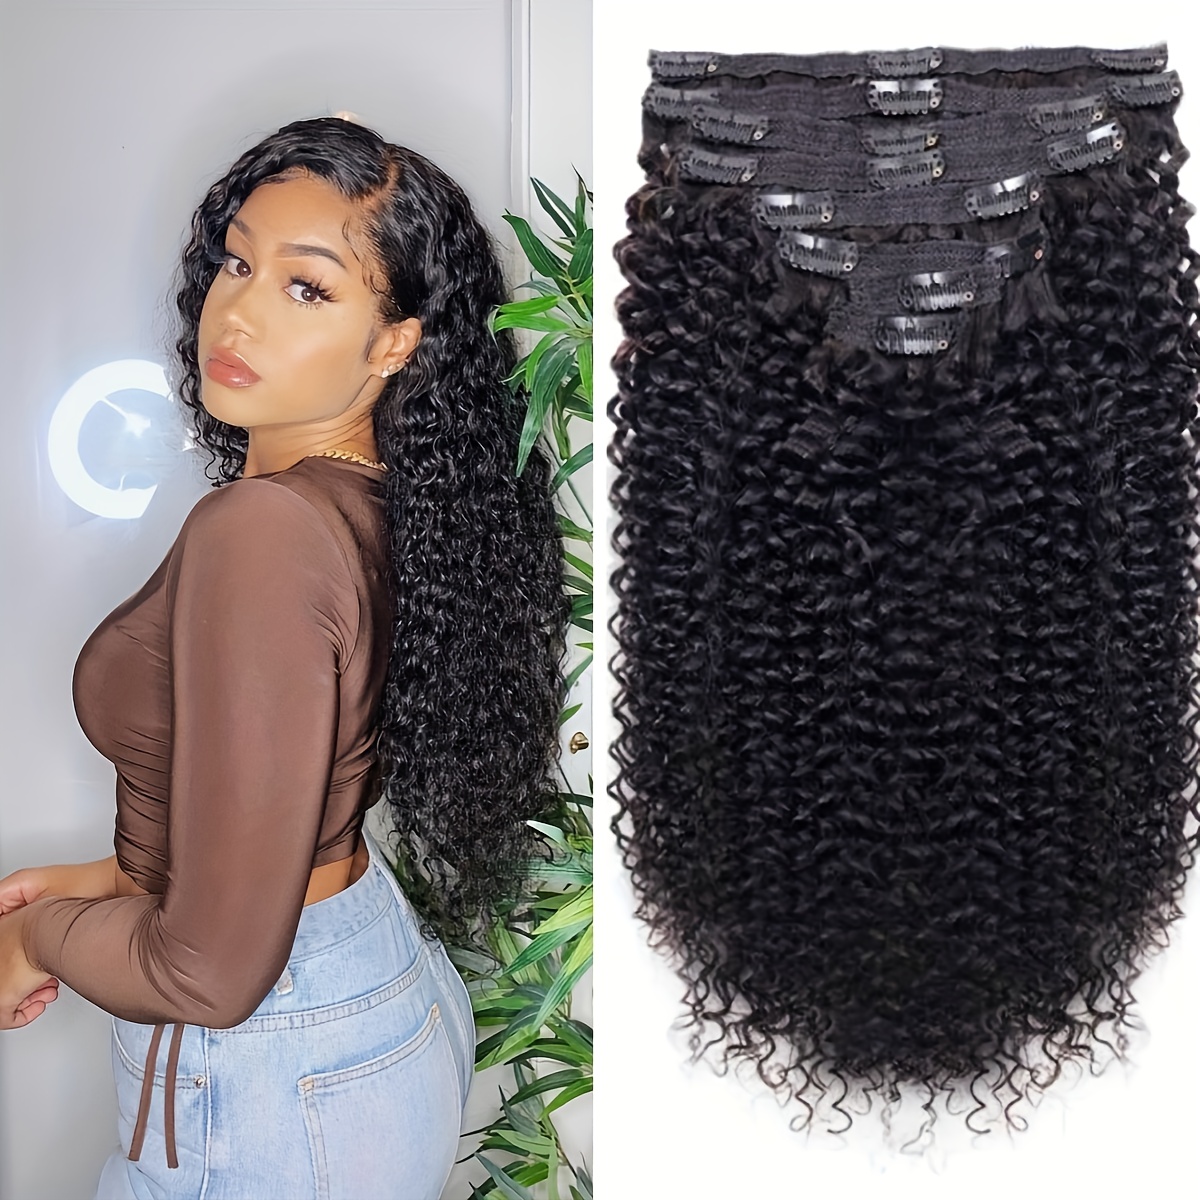 

8pcs Clip In Human Hair Extensions Kinky Curly Hair Pieces For Women Double Weft Brazilian Virgin Human Hair Extensions Wigs Natural Black Color 8-26inch Hair Clips Hair Accessories